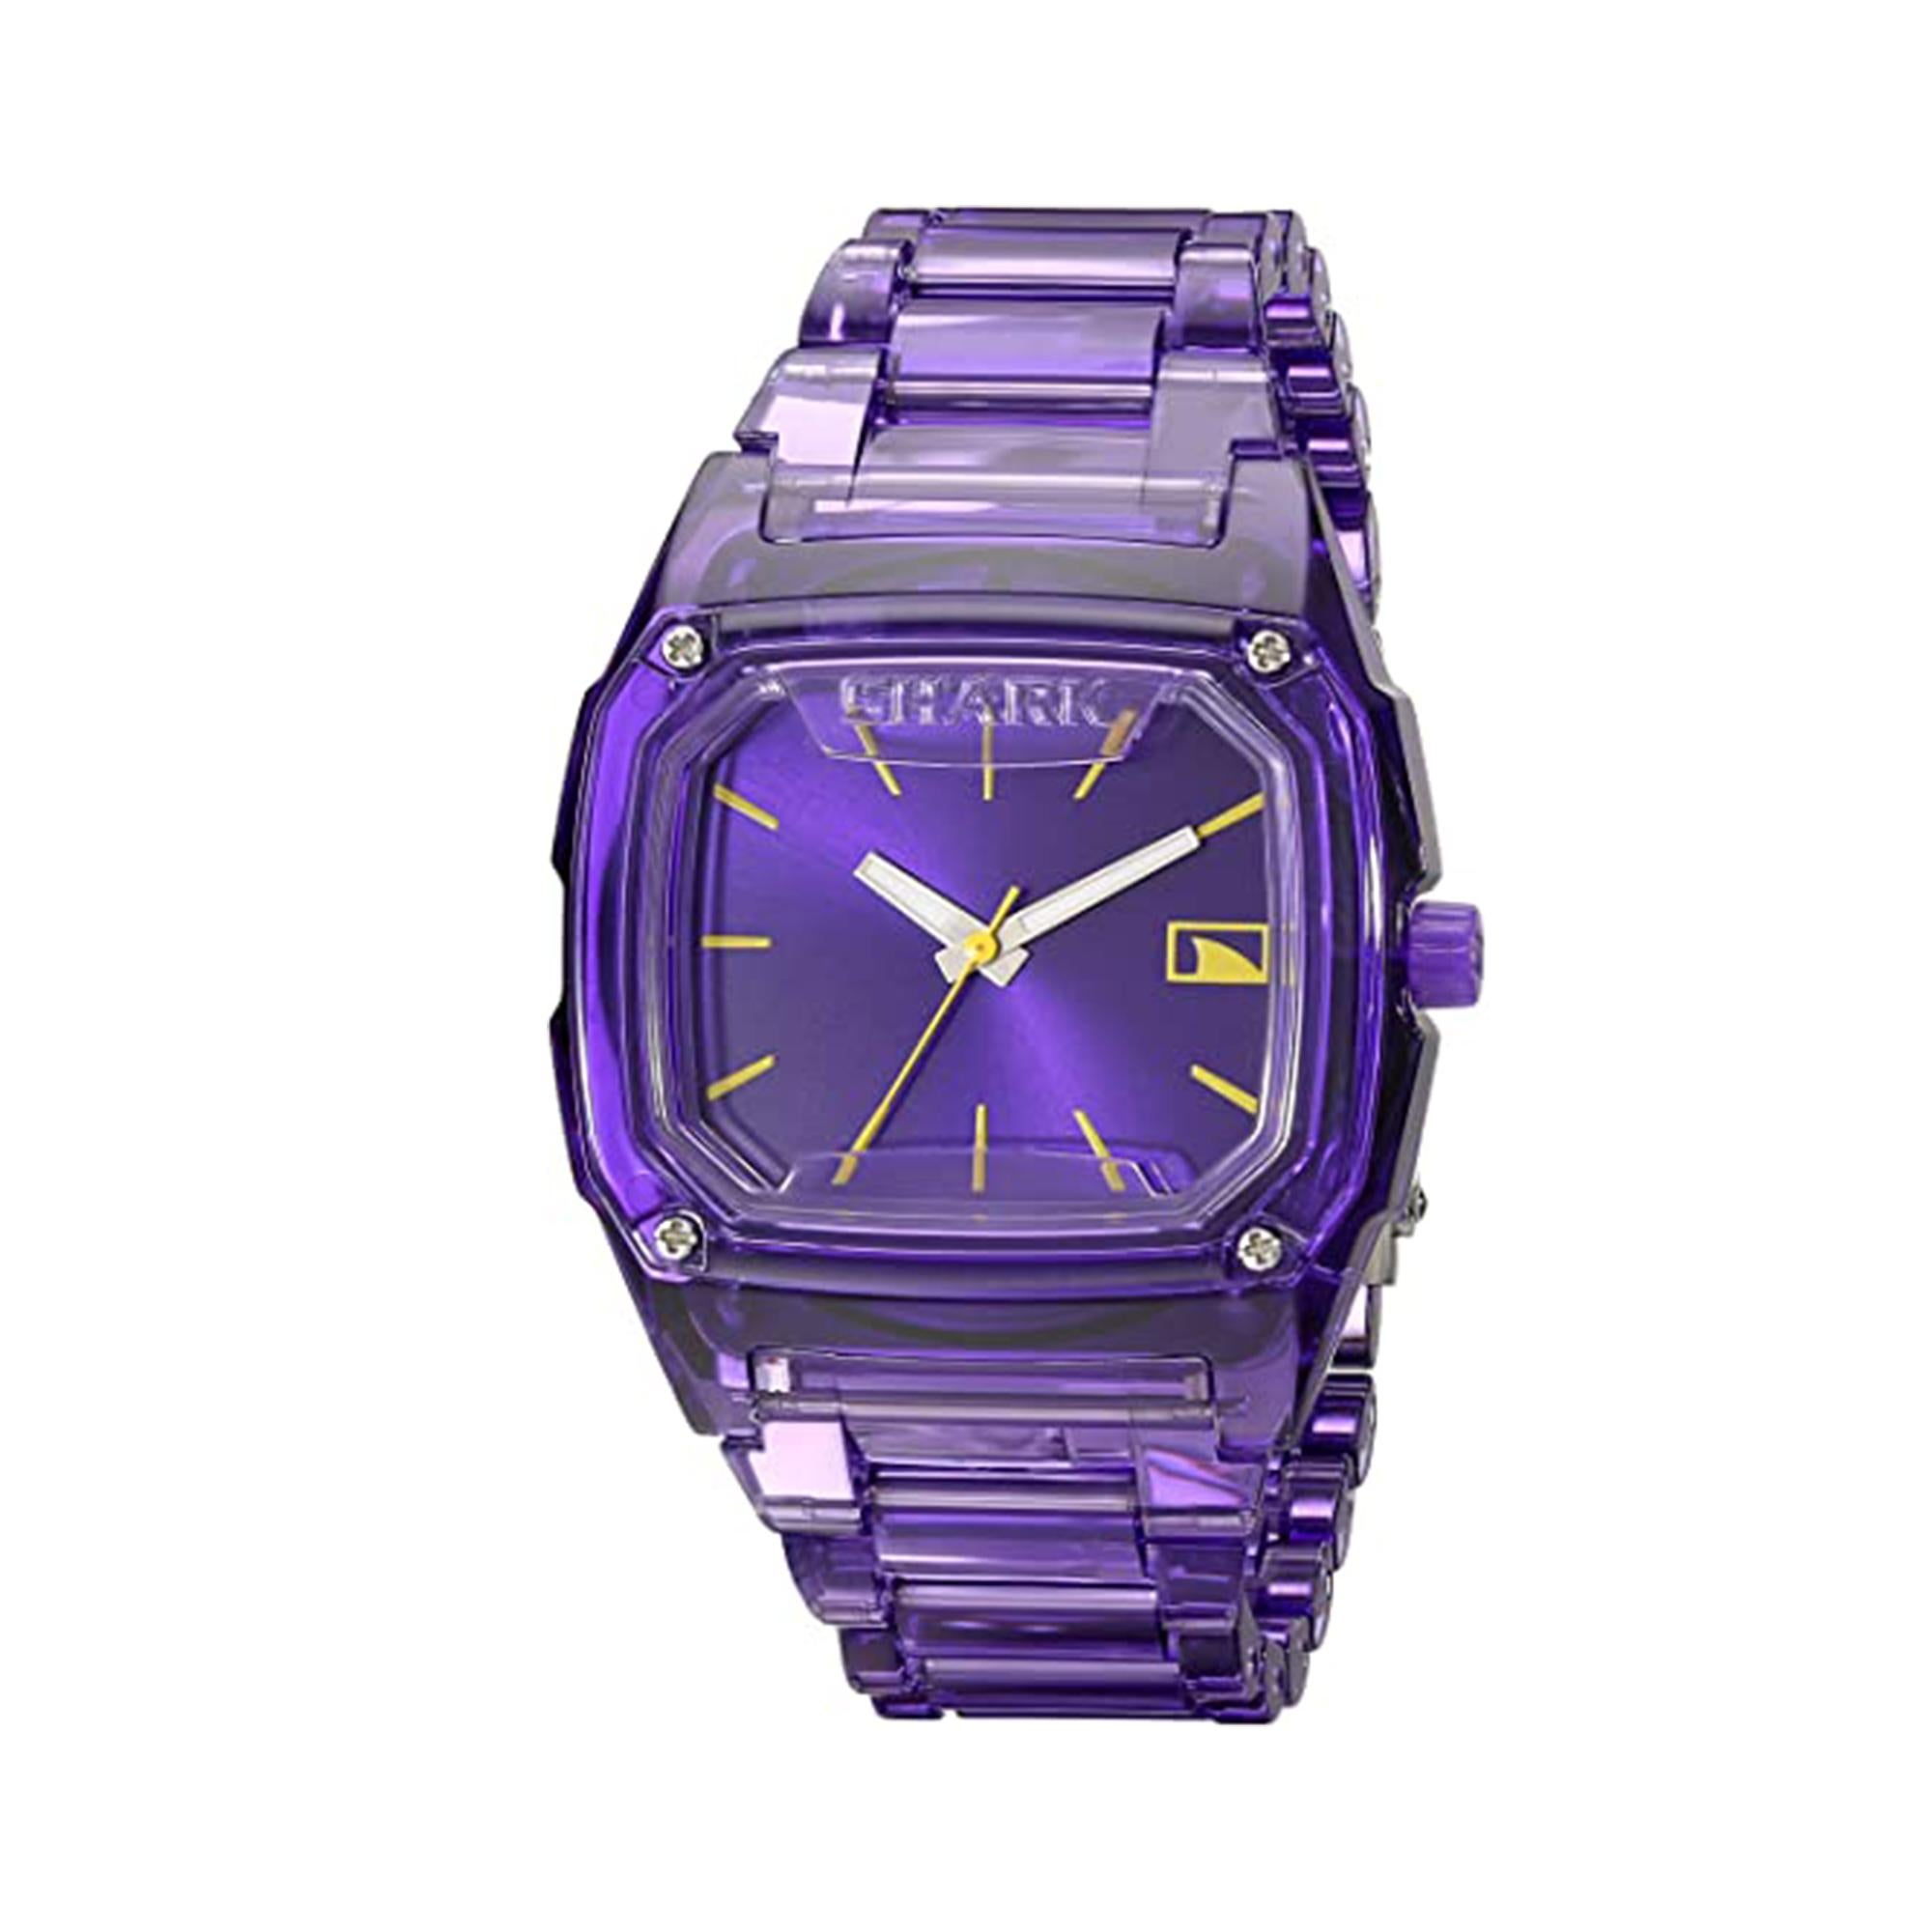 This timepiece features a 38mm wide and 12mm thick purple translucent polycarbonate plastic case with a fixed bezel and textured push-down crown. 
It is powered by a Japanese quartz movement. This watch also features a sharp looking purple dial with